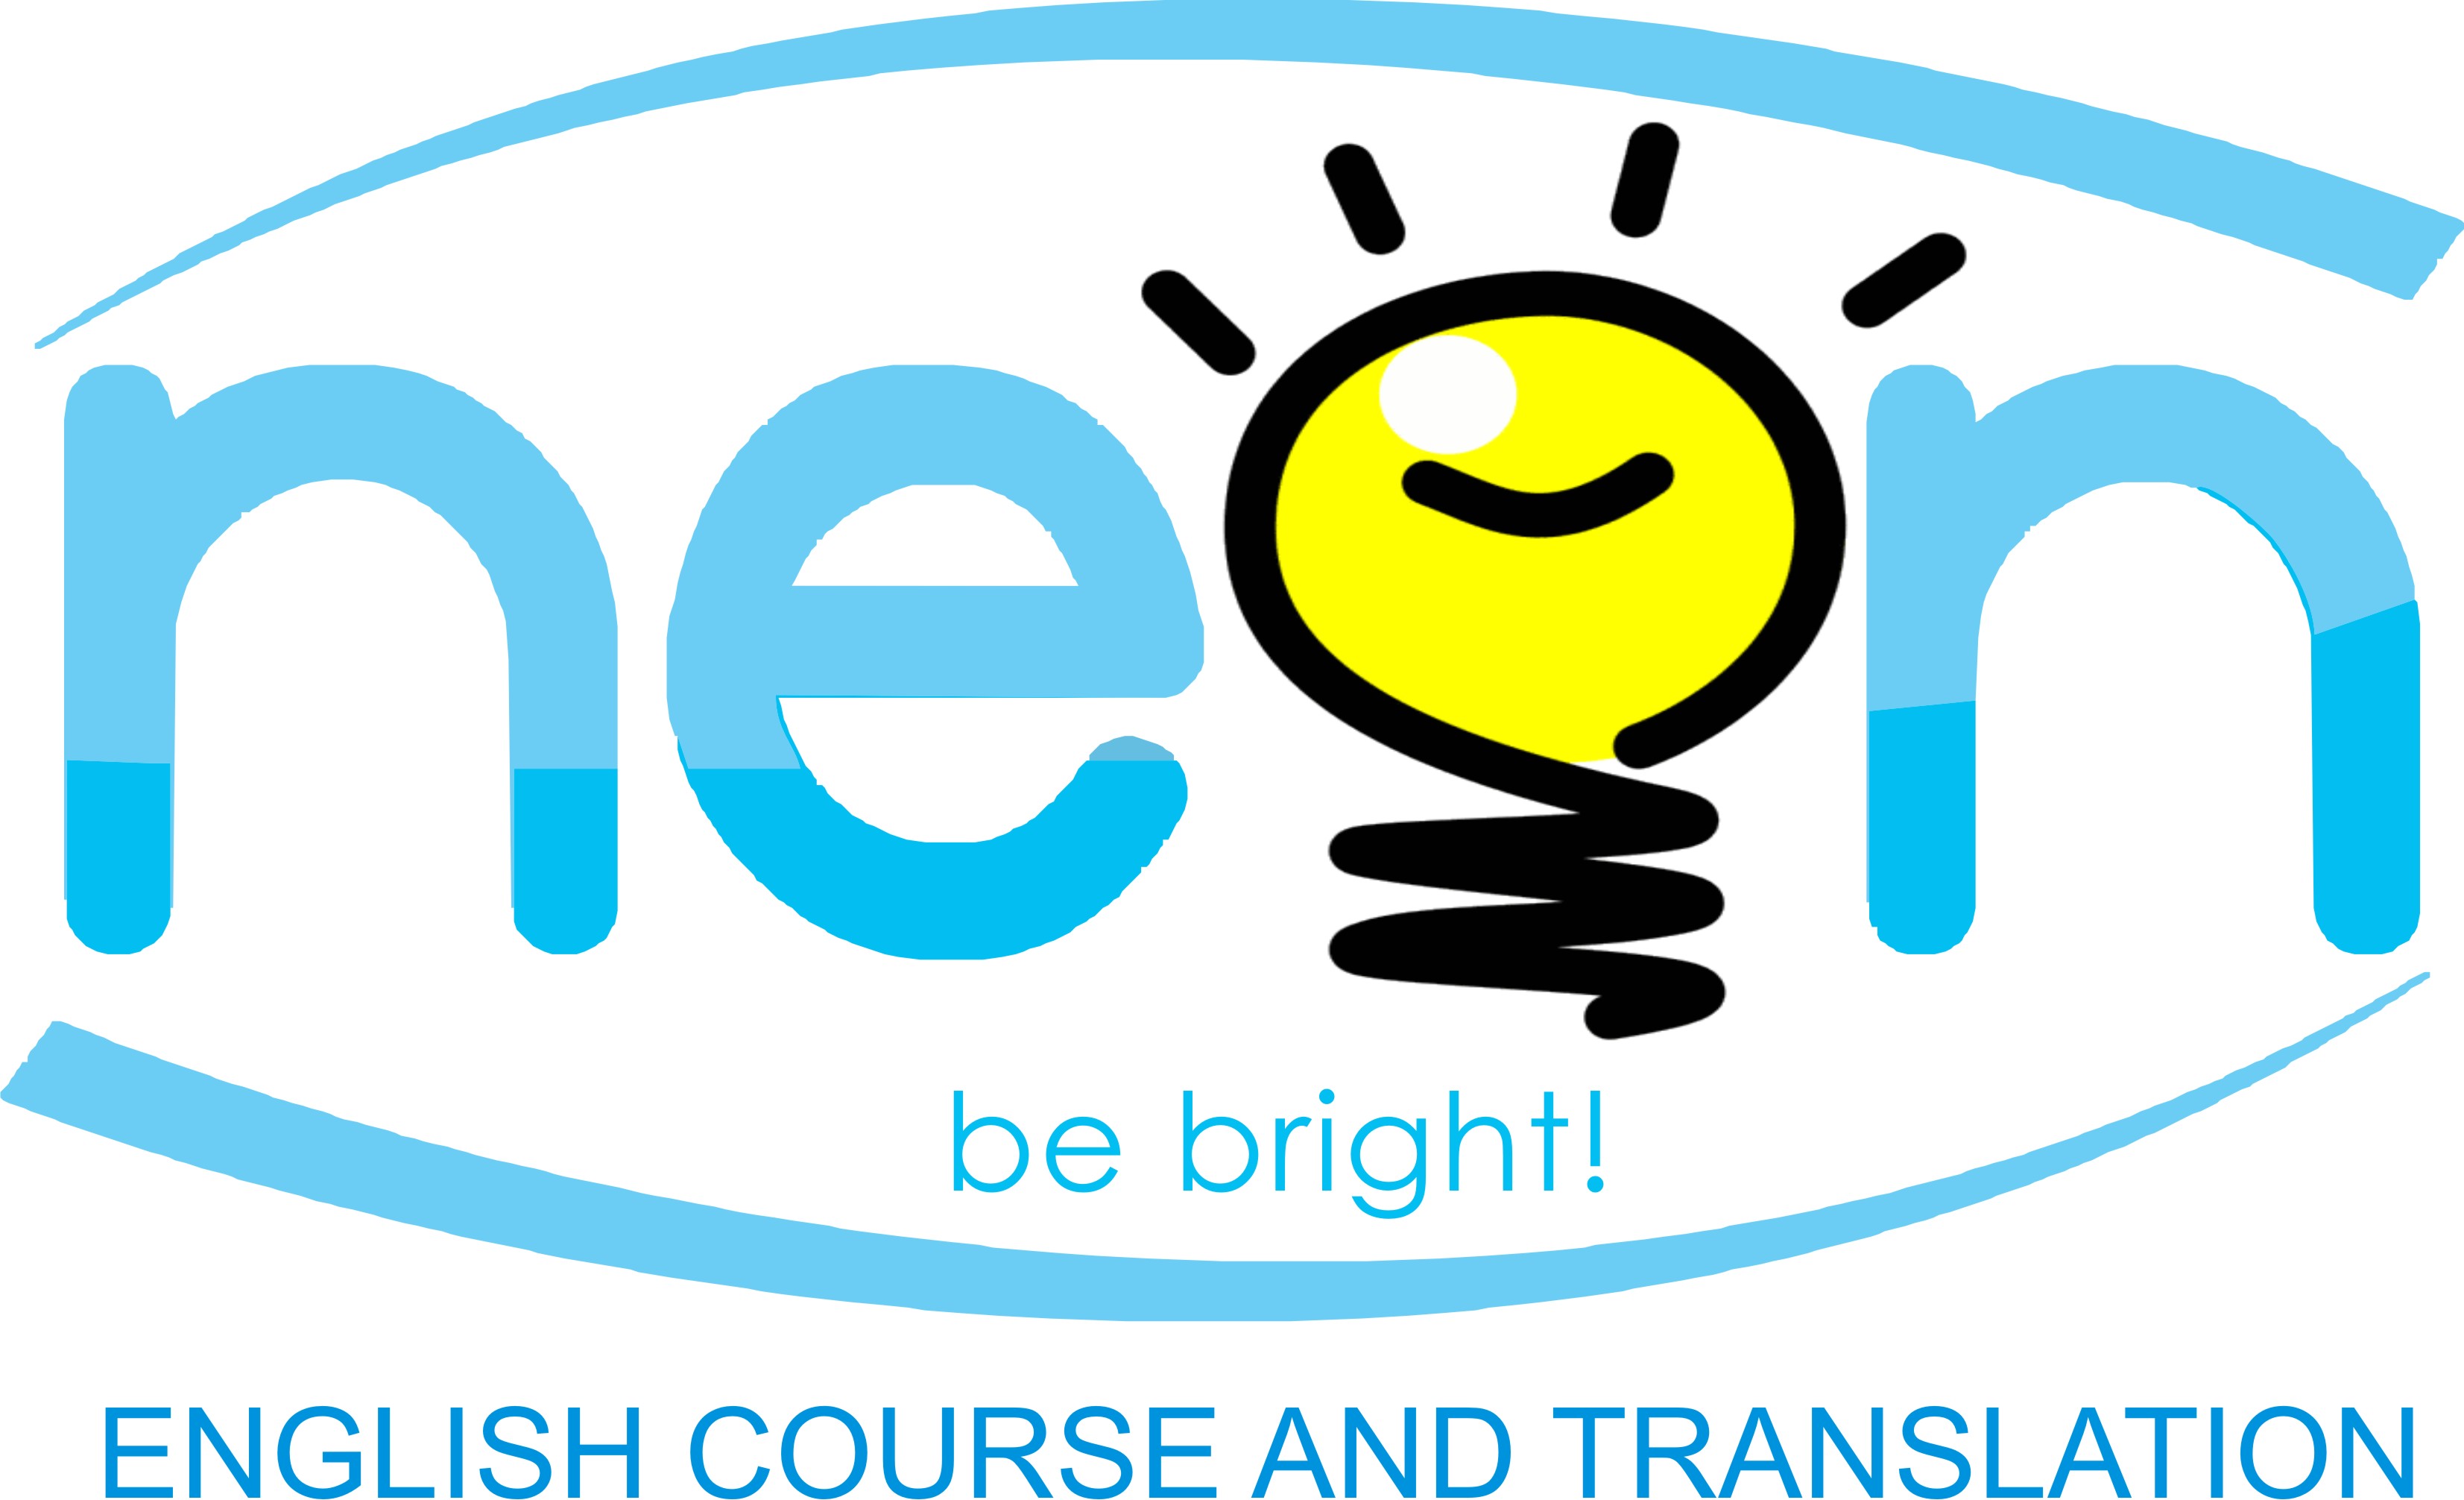 NEON English Course and Translation